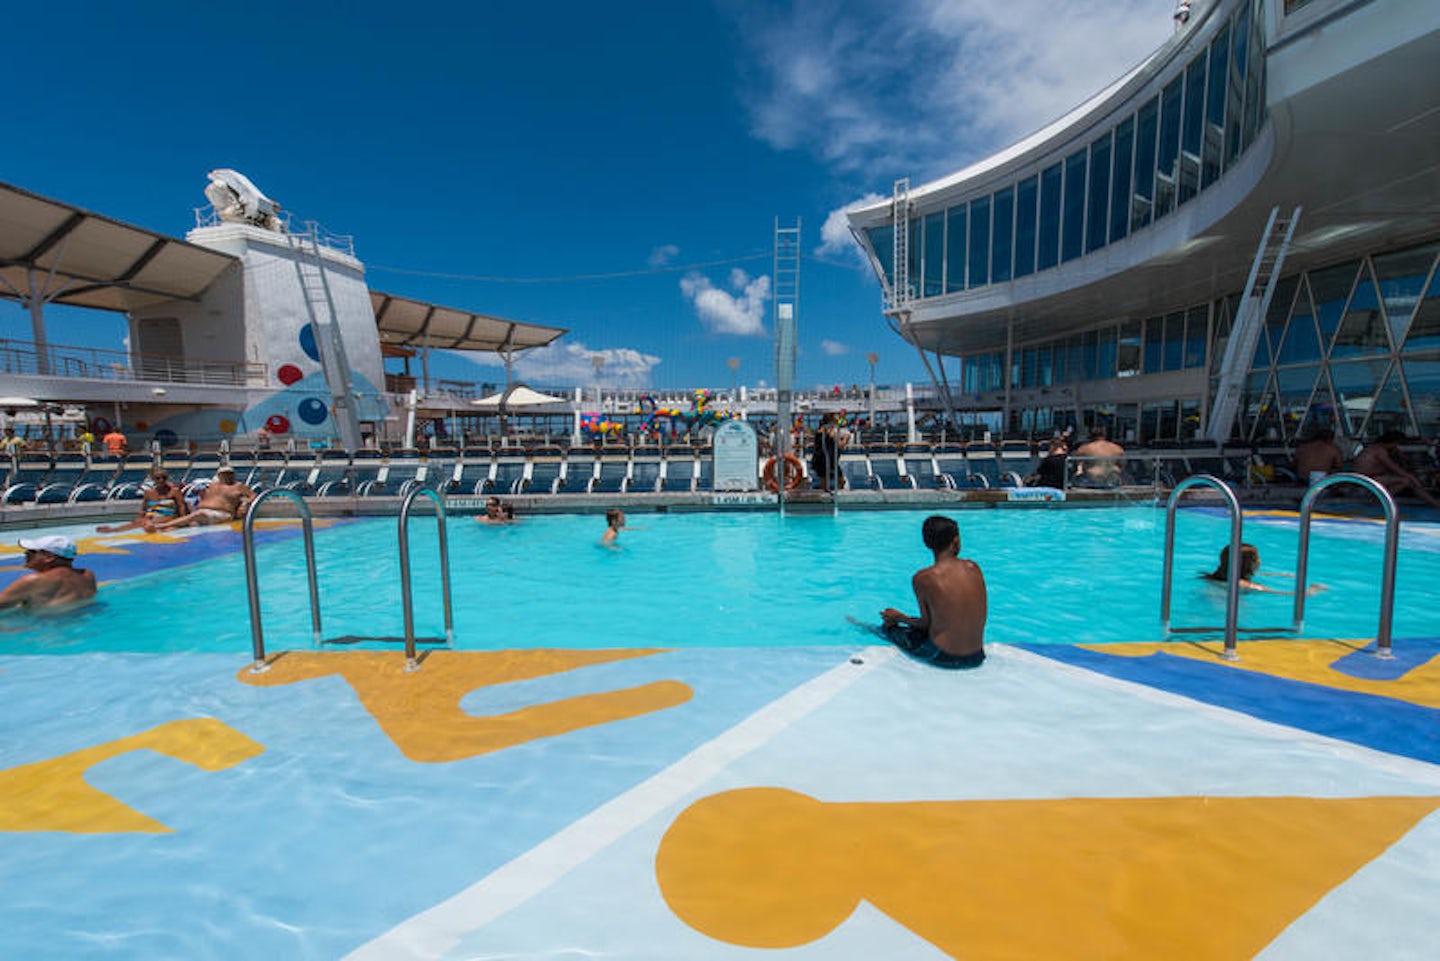 The Sports Pool on Oasis of the Seas